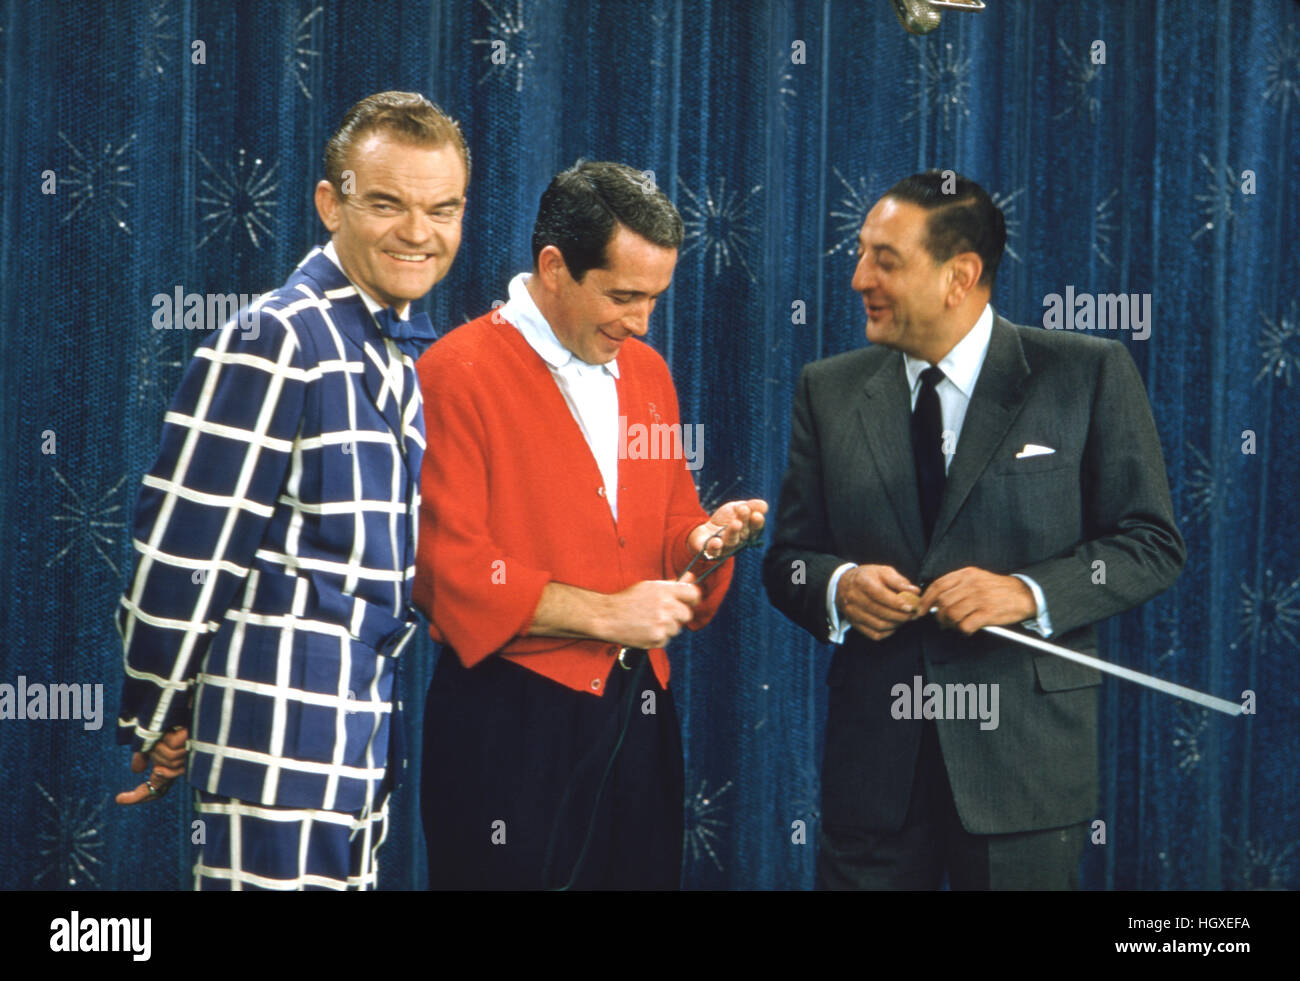 Spike Jones (left), Perry Como (center), and Guy Lombardo, appearing on stage at Como’s television show, 1956. Stock Photo